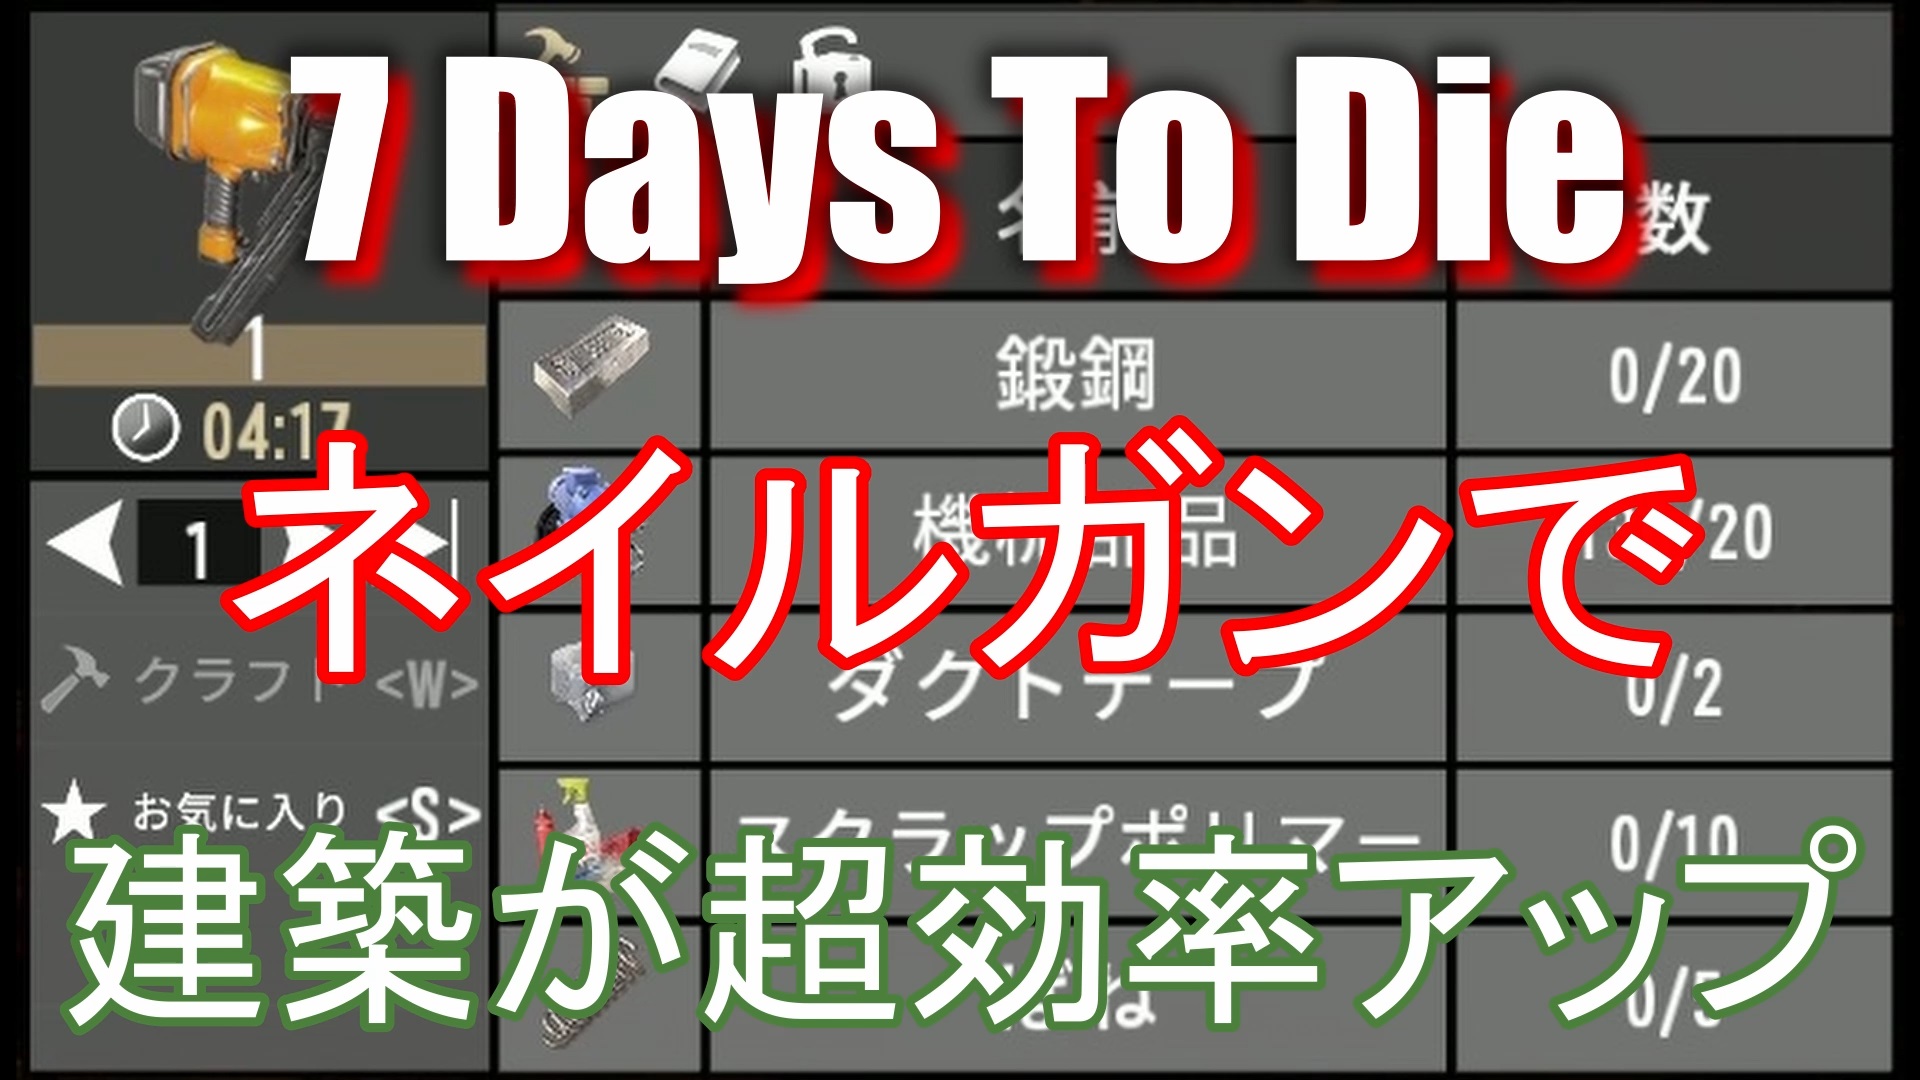 7 Days To Die A19 2 建築初心者必見 ネイルガンで超効率アップ Steamゲーマー戦記